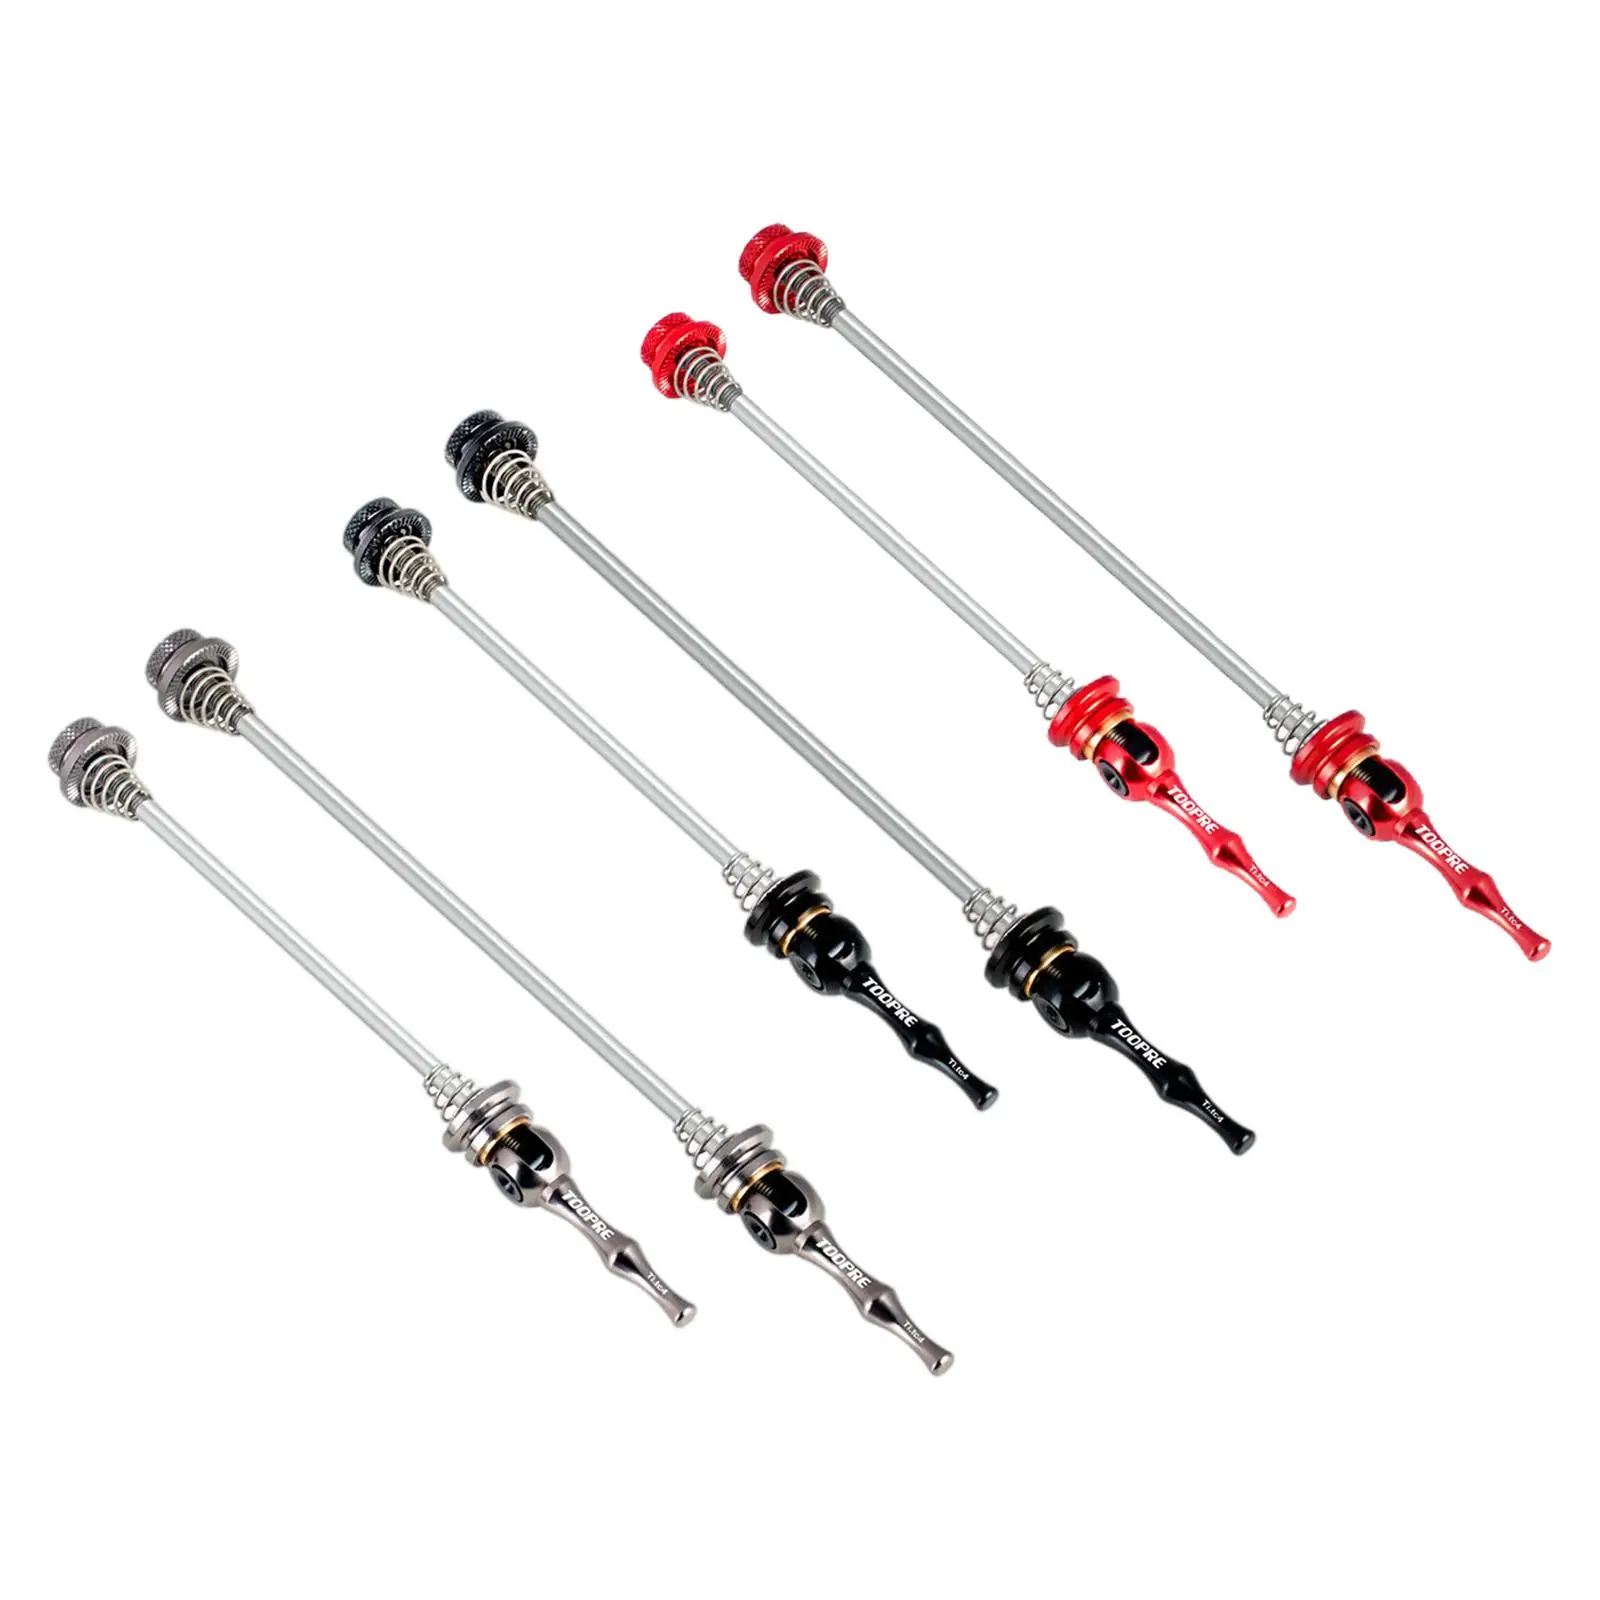 2Pcs Bike Quick Release Skewer 100mm 135mm Wheel Hub for Mountain Bicycle Cycling Tools